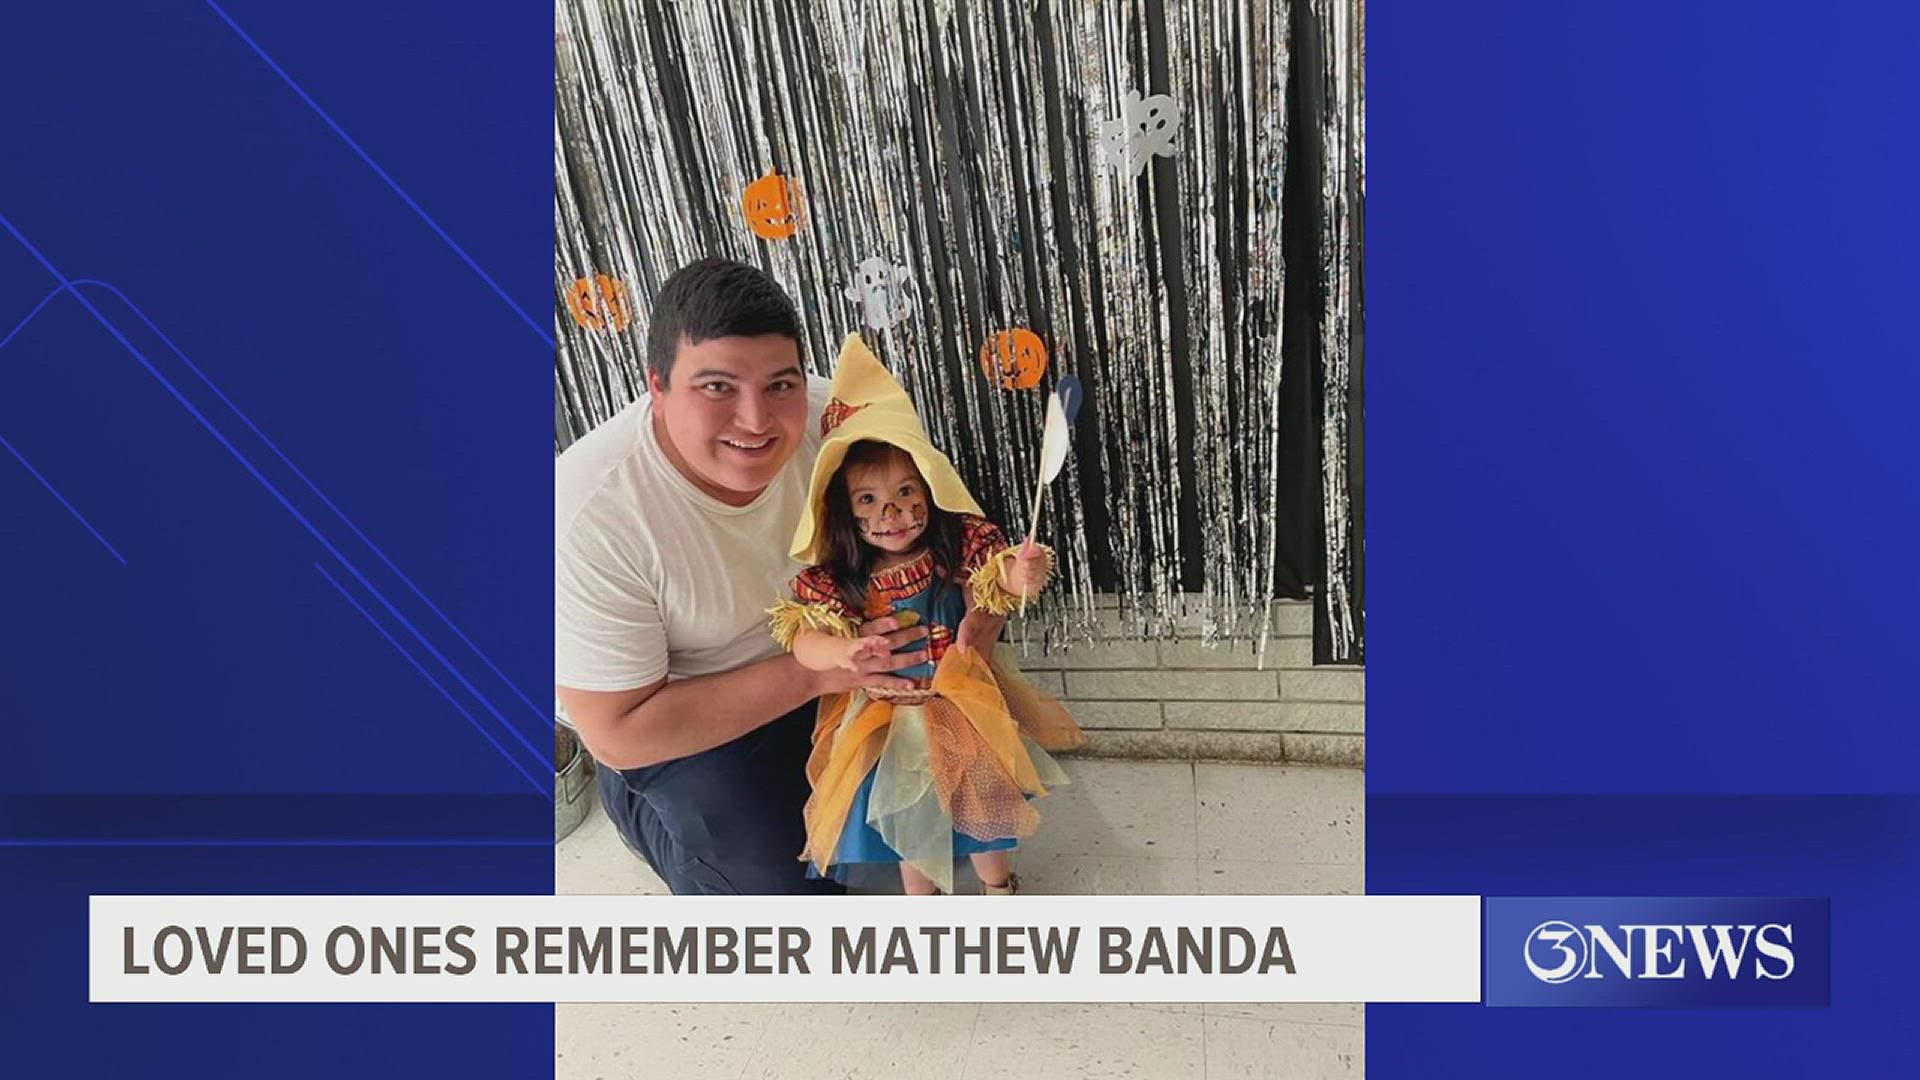 Loved ones tell 3News that Banda was a loving father and a friend to all. He would have turned 28 later this month.